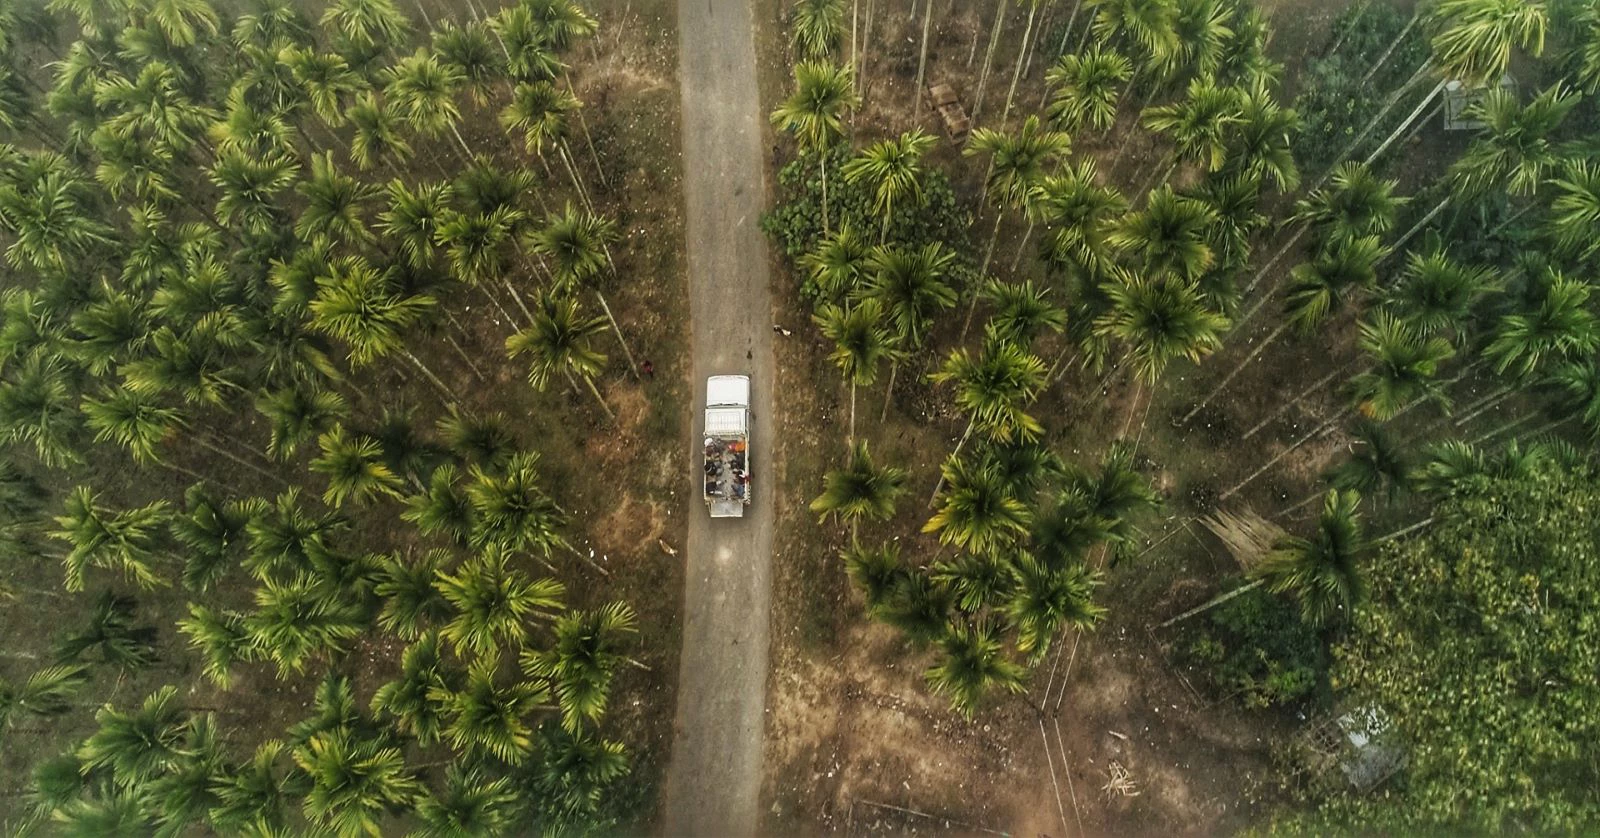 A vehicle navigates a rural road in the Indian state of Meghalaya.